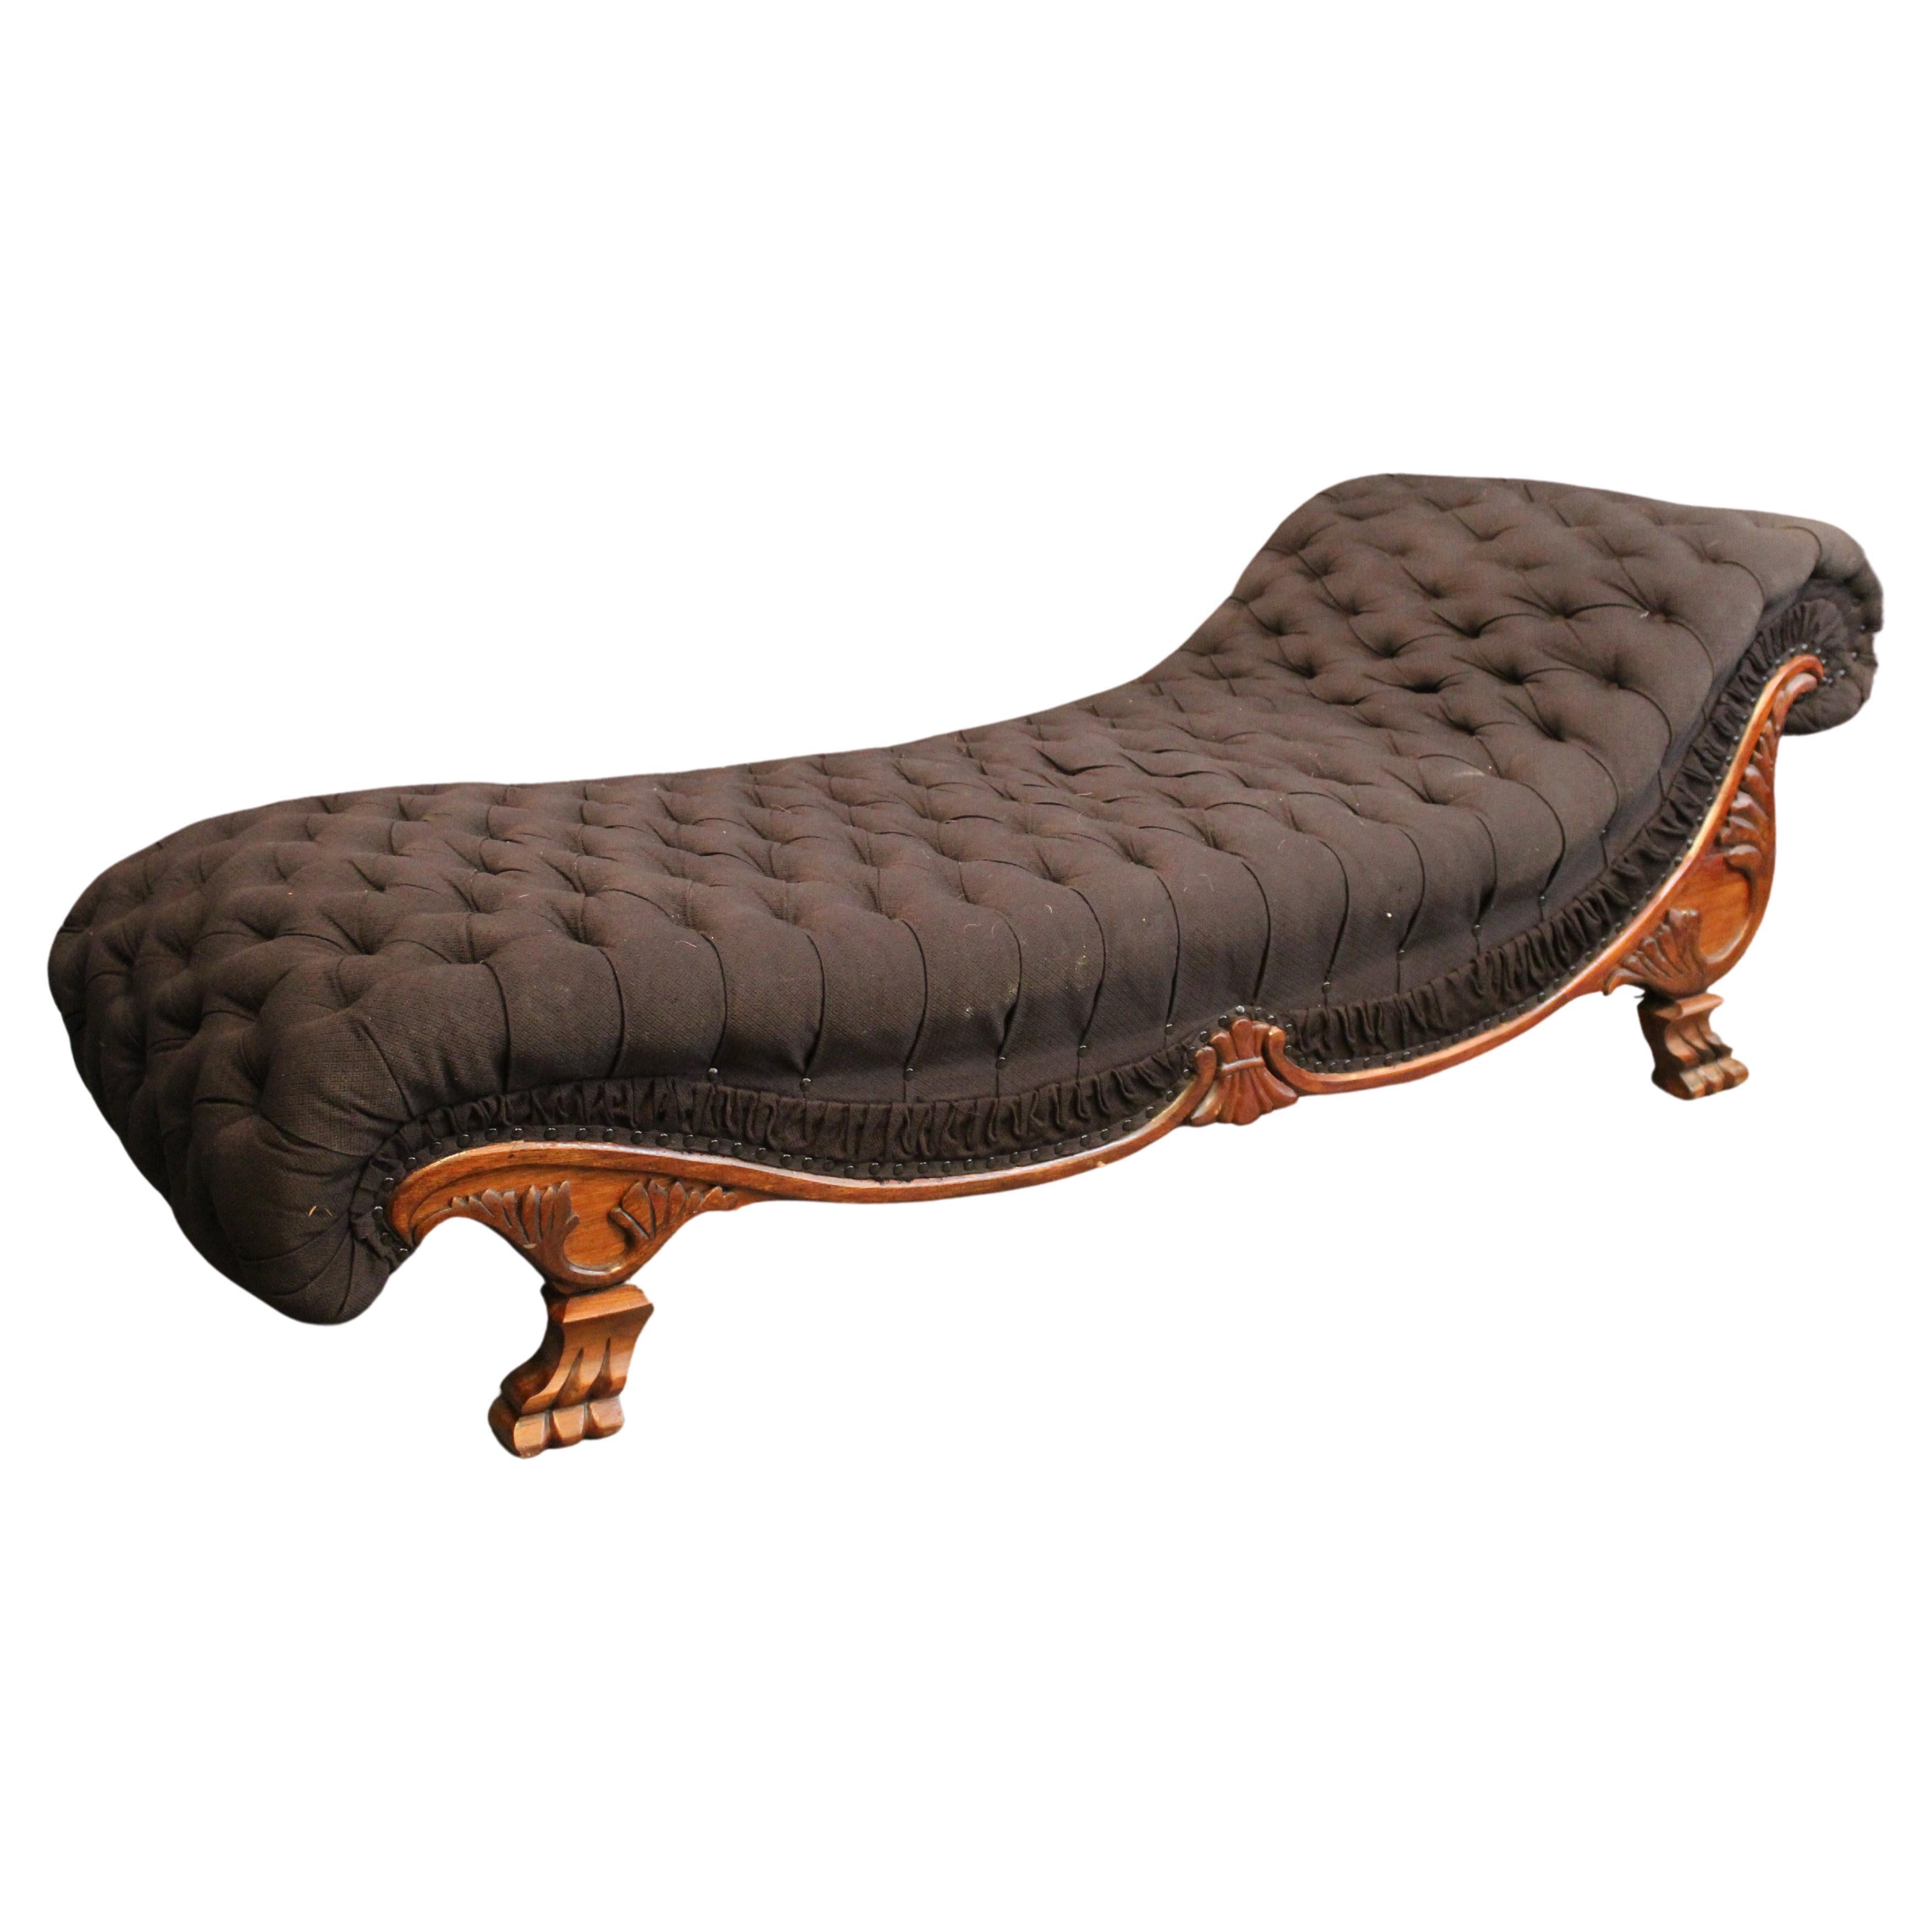 What is another name for a fainting couch?